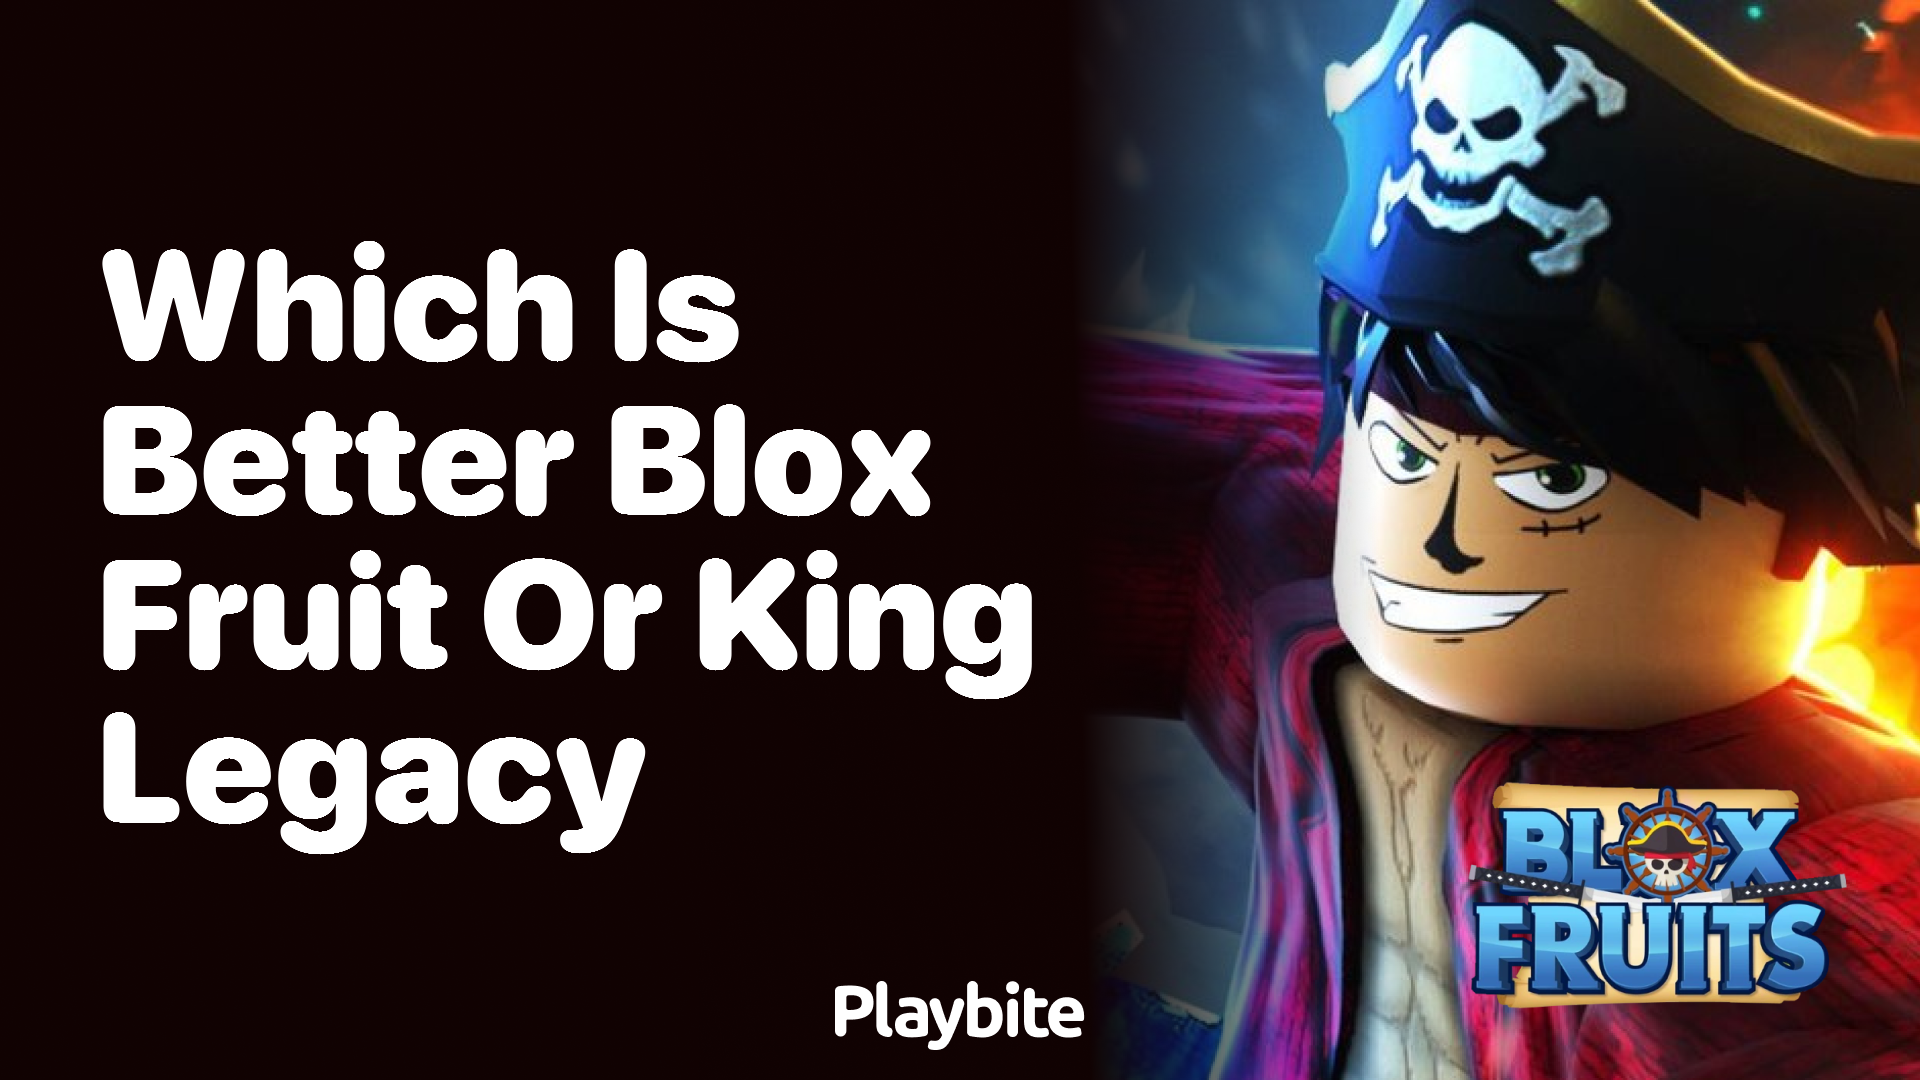 Which is Better: Blox Fruit or King Legacy?